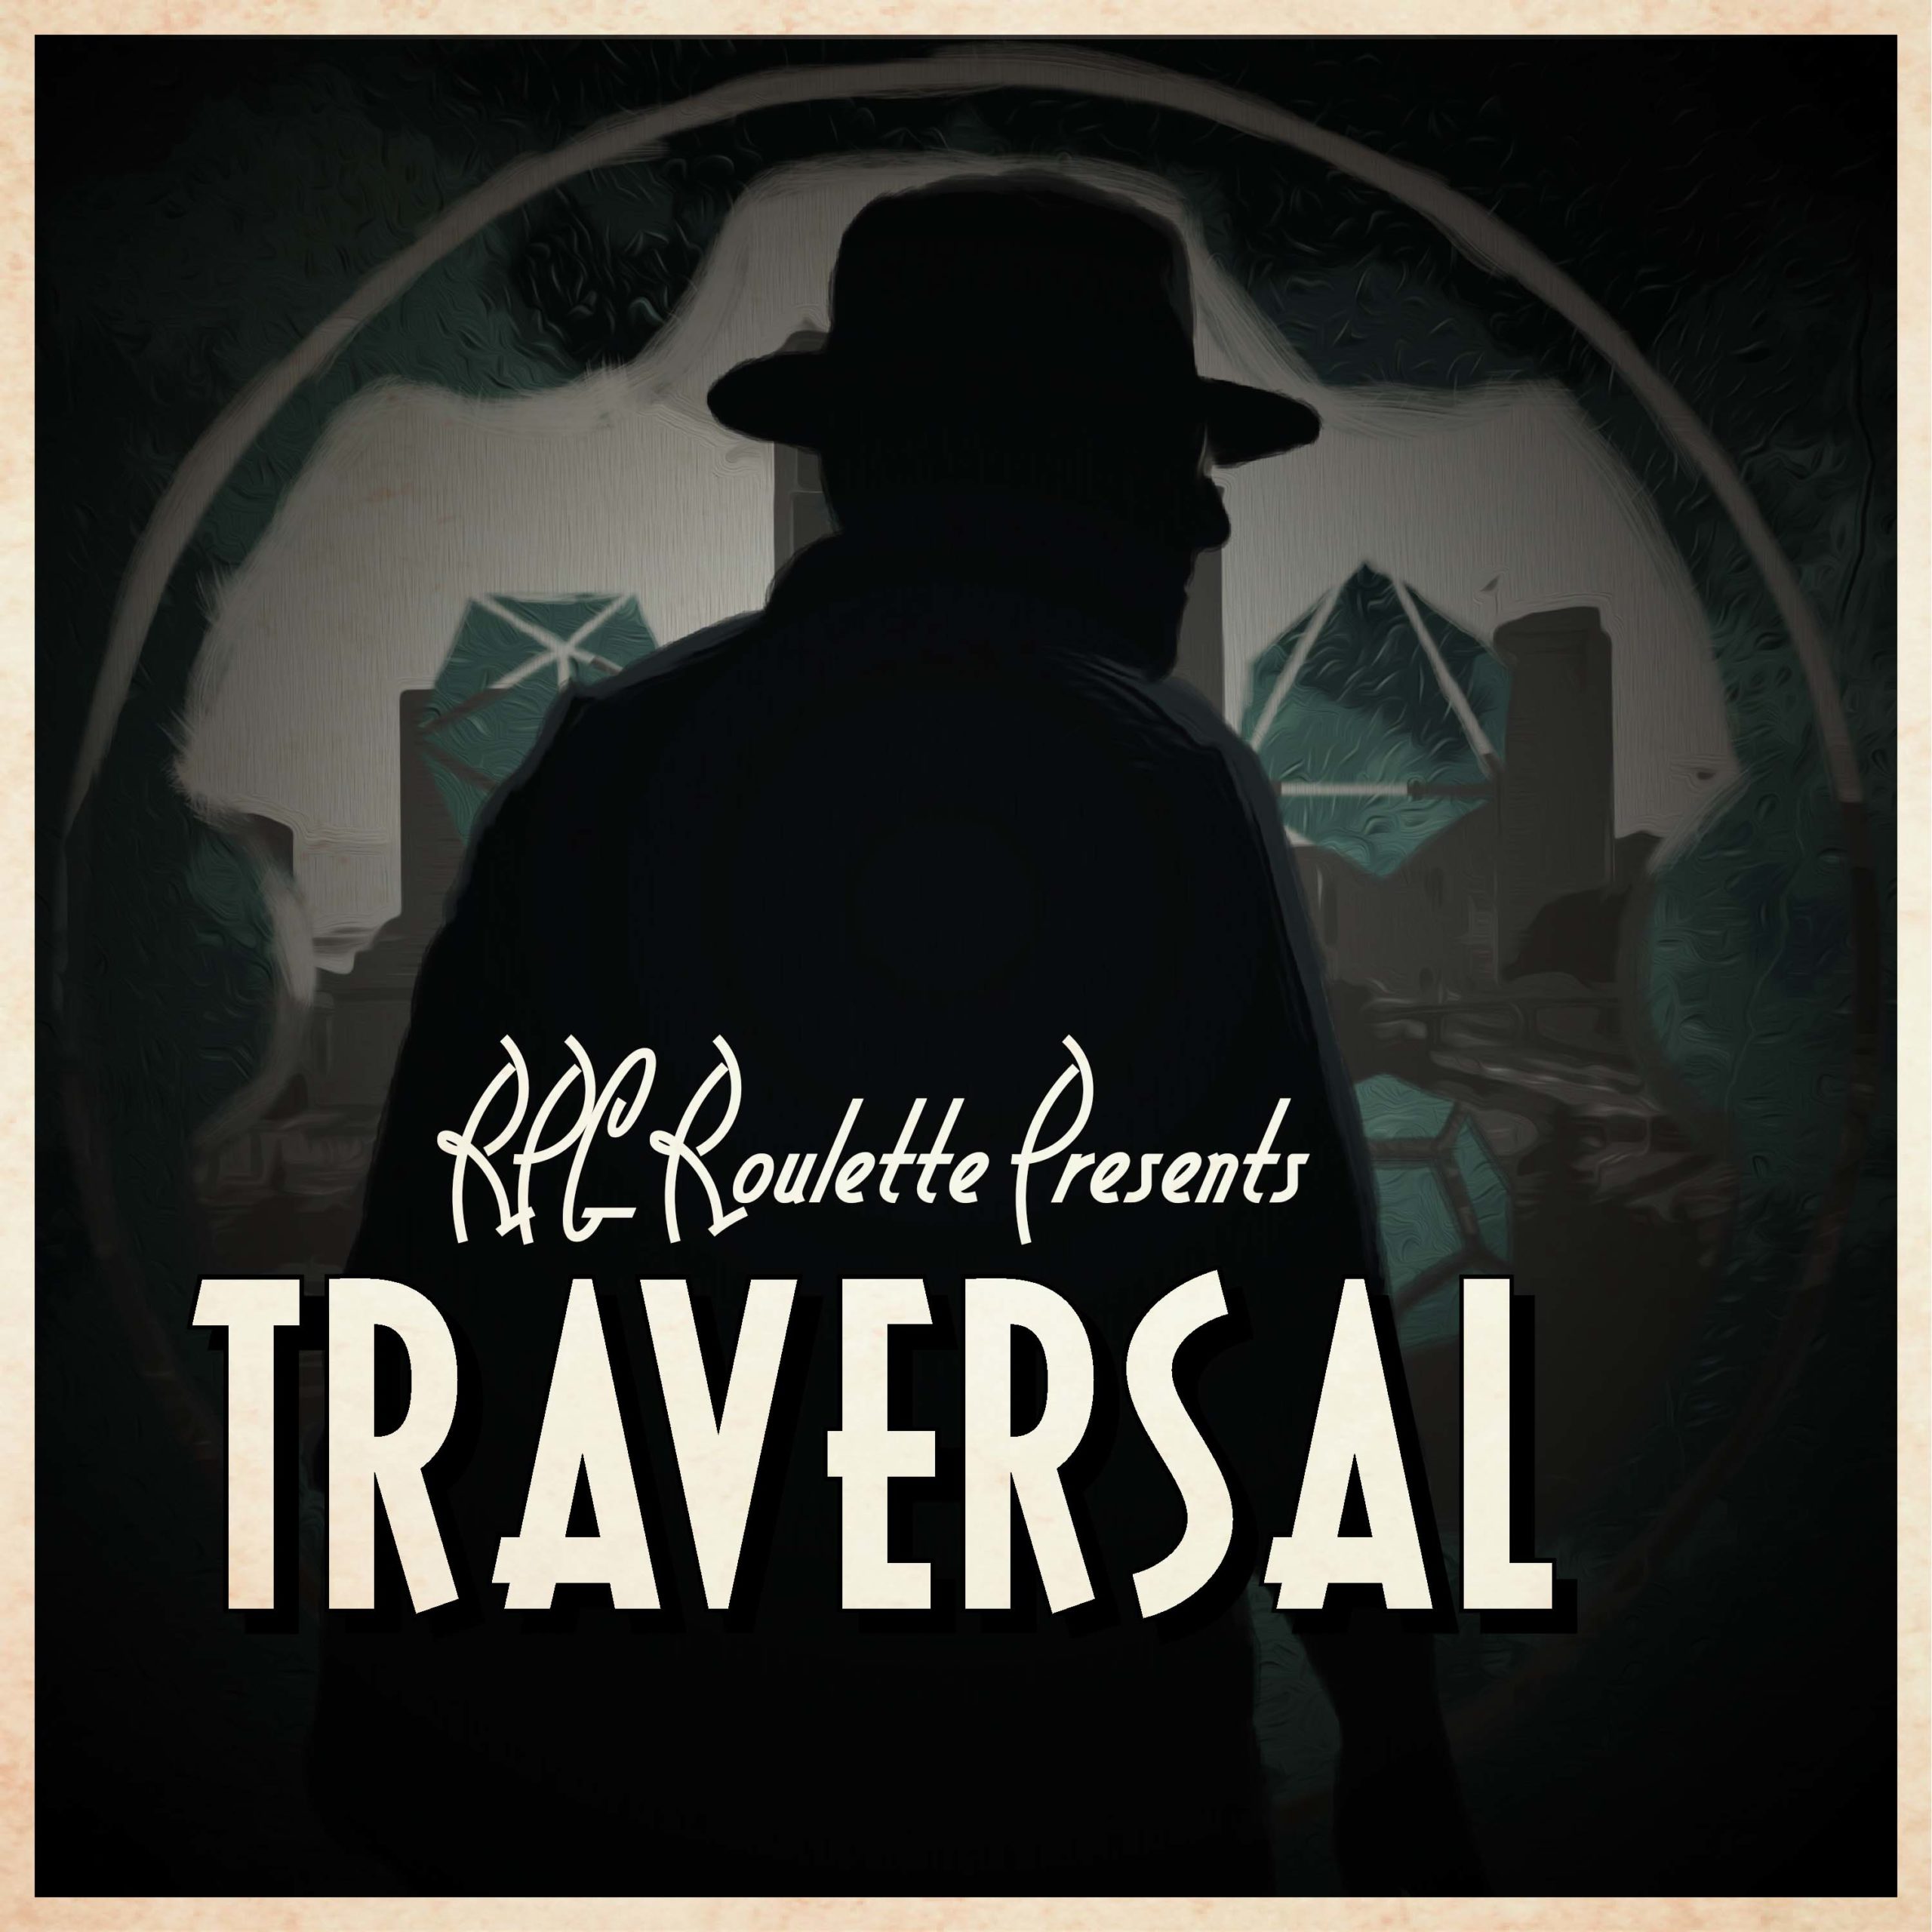 RPG Roulette Presents: “Traversal”